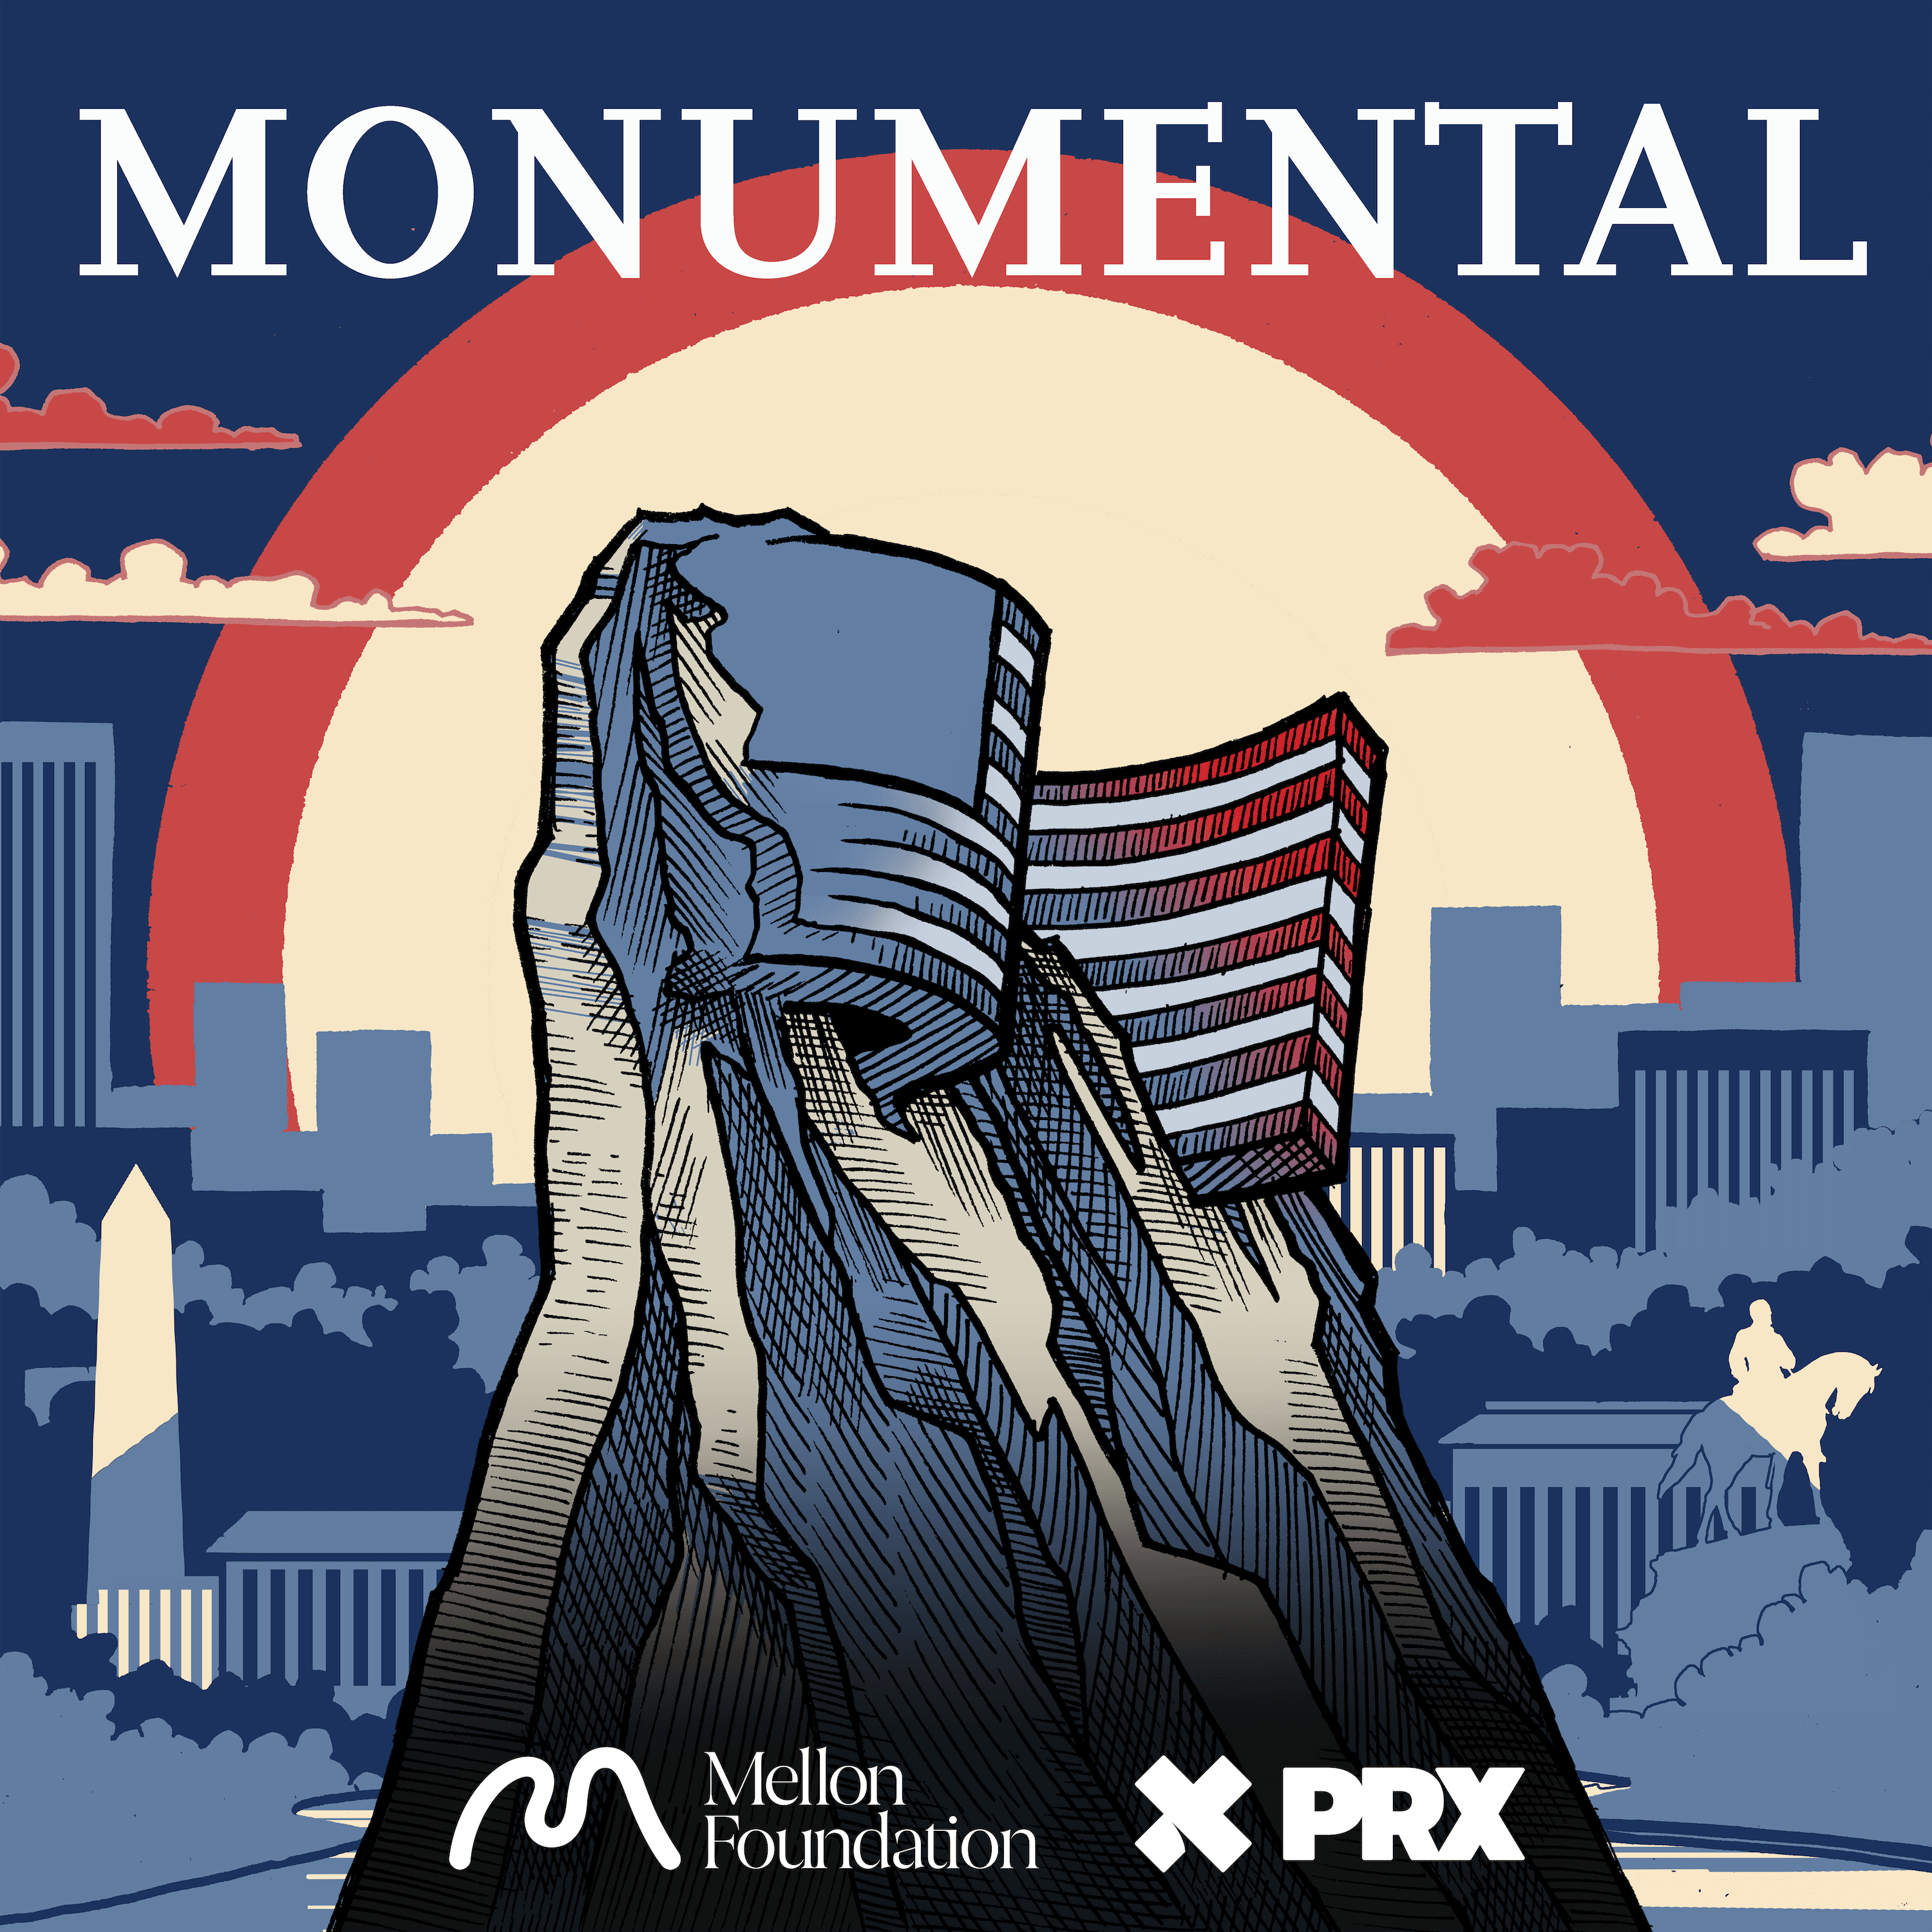 Thumbnail for "In NYC, A Tale of Two Monuments".